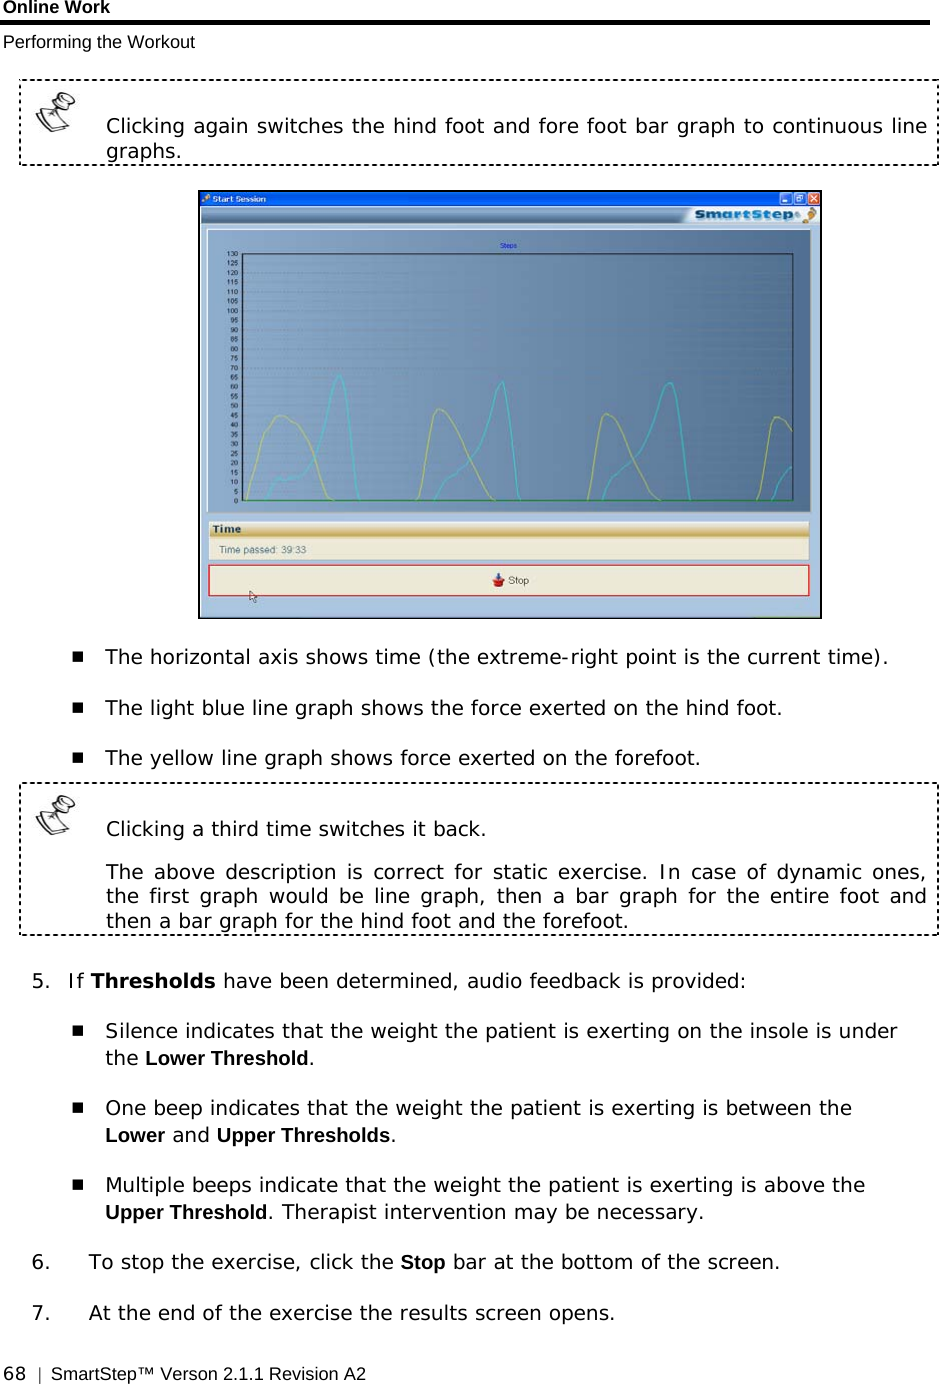 Online Work Performing the Workout  68  |  SmartStep™ Verson 2.1.1 Revision A2     Clicking again switches the hind foot and fore foot bar graph to continuous line graphs.    The horizontal axis shows time (the extreme-right point is the current time).  The light blue line graph shows the force exerted on the hind foot.  The yellow line graph shows force exerted on the forefoot.   Clicking a third time switches it back.     The above description is correct for static exercise. In case of dynamic ones, the first graph would be line graph, then a bar graph for the entire foot and then a bar graph for the hind foot and the forefoot.  5. If Thresholds have been determined, audio feedback is provided:  Silence indicates that the weight the patient is exerting on the insole is under the Lower Threshold.   One beep indicates that the weight the patient is exerting is between the Lower and Upper Thresholds.  Multiple beeps indicate that the weight the patient is exerting is above the Upper Threshold. Therapist intervention may be necessary. 6. To stop the exercise, click the Stop bar at the bottom of the screen. 7. At the end of the exercise the results screen opens. 